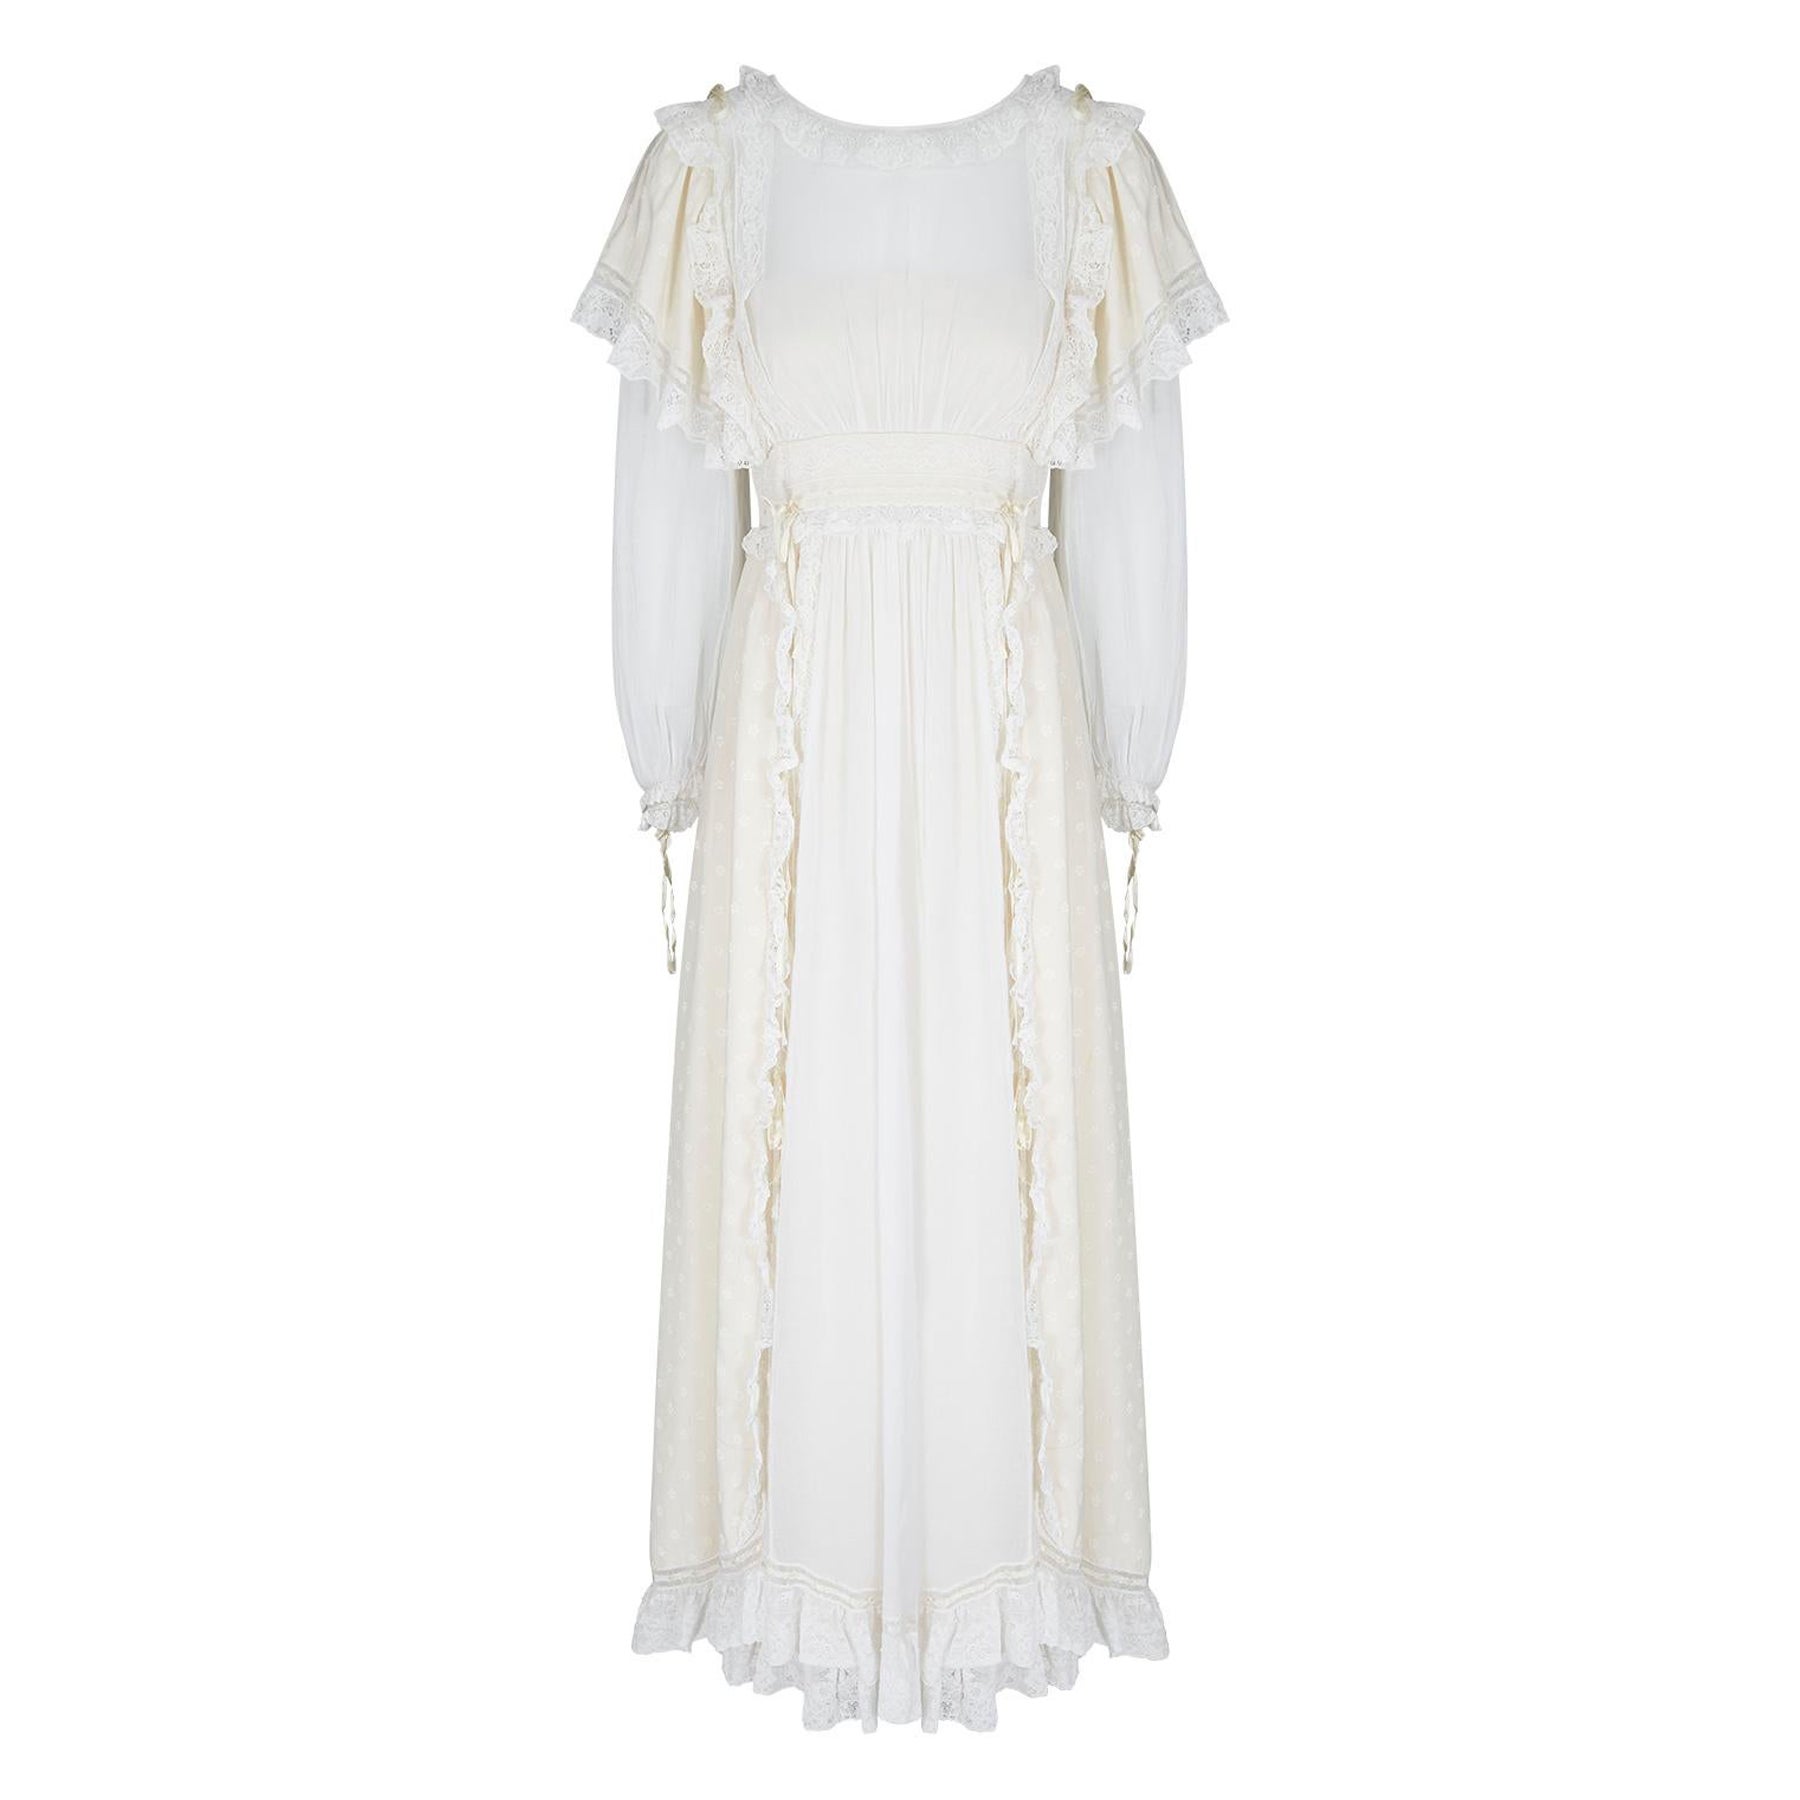 1970s Gina Fratini Cream Silk and Lace Wedding Dress For Sale